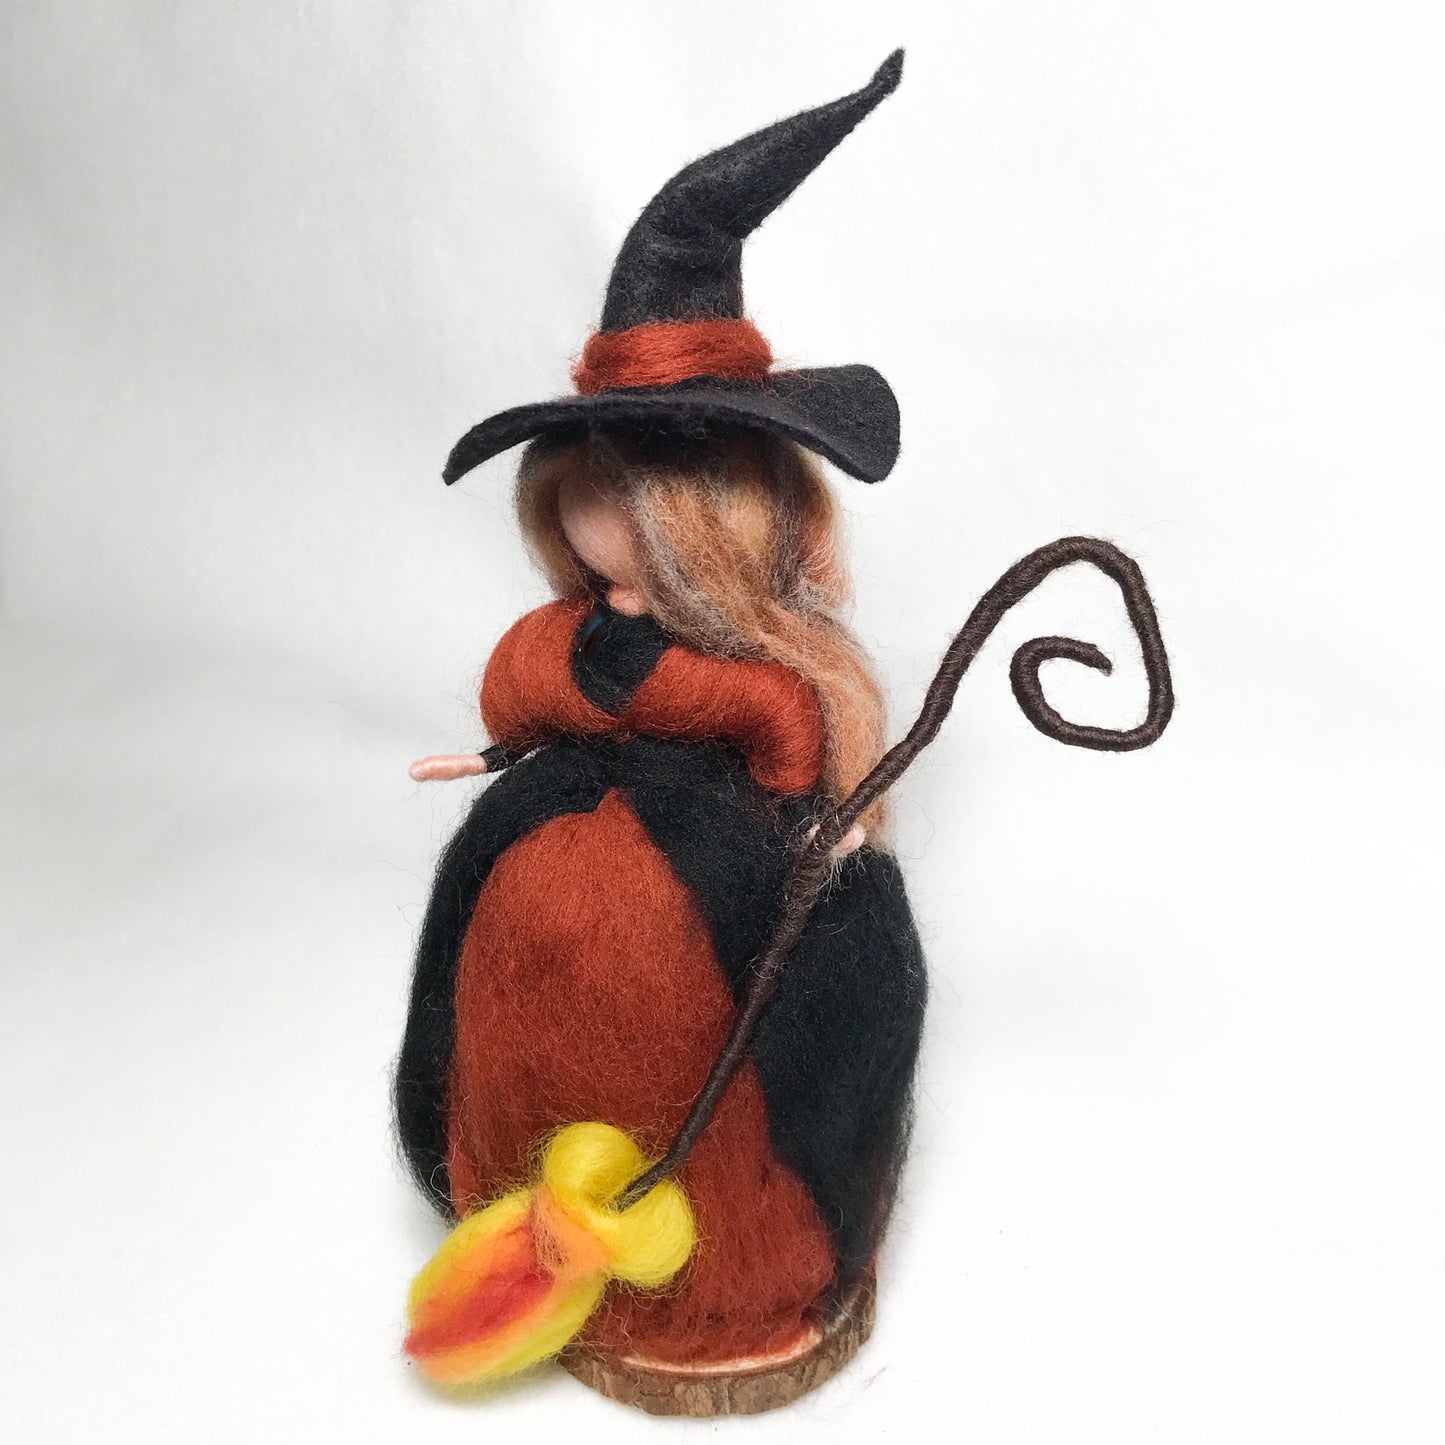 Wise Autumn Witch with a fire broom, by Rachel Mack